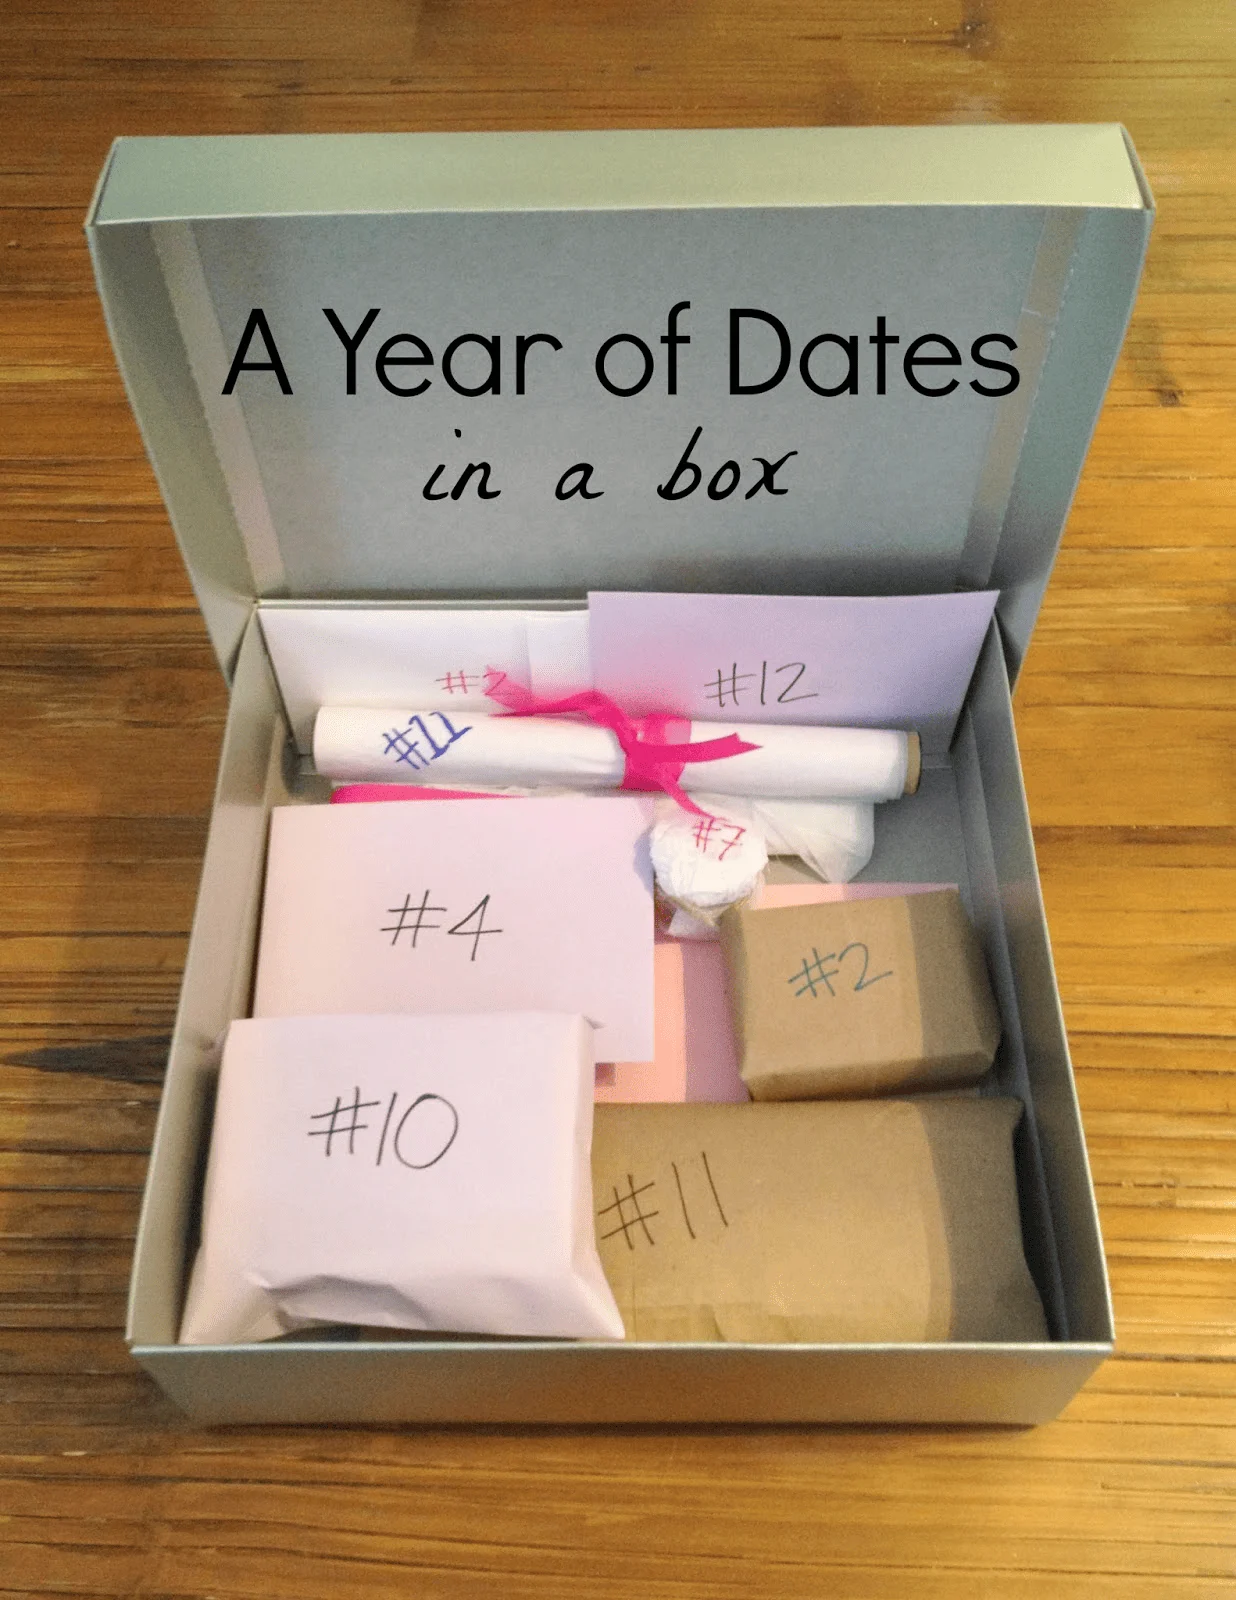 Last Minute DIY Gifts for Your Boyfriend: Show Your Love with a Personal  Touch